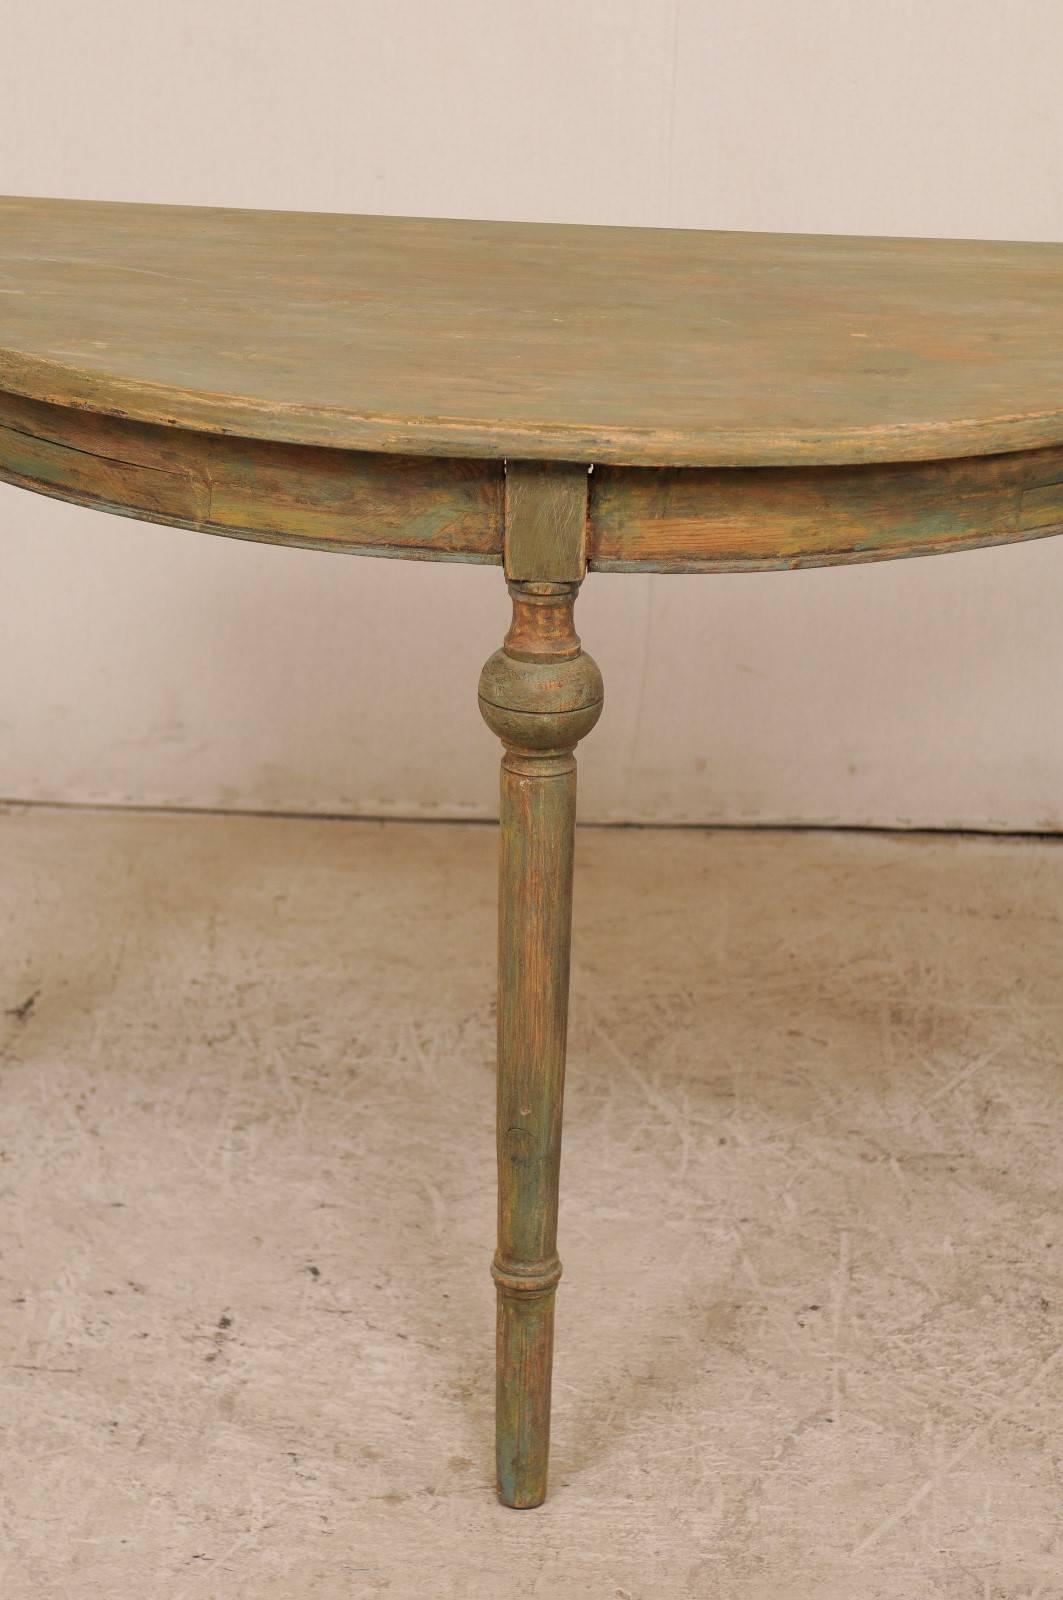 Pair of 19th Century Swedish Painted Wood Demilune Tables in Warm Sage Hues 4